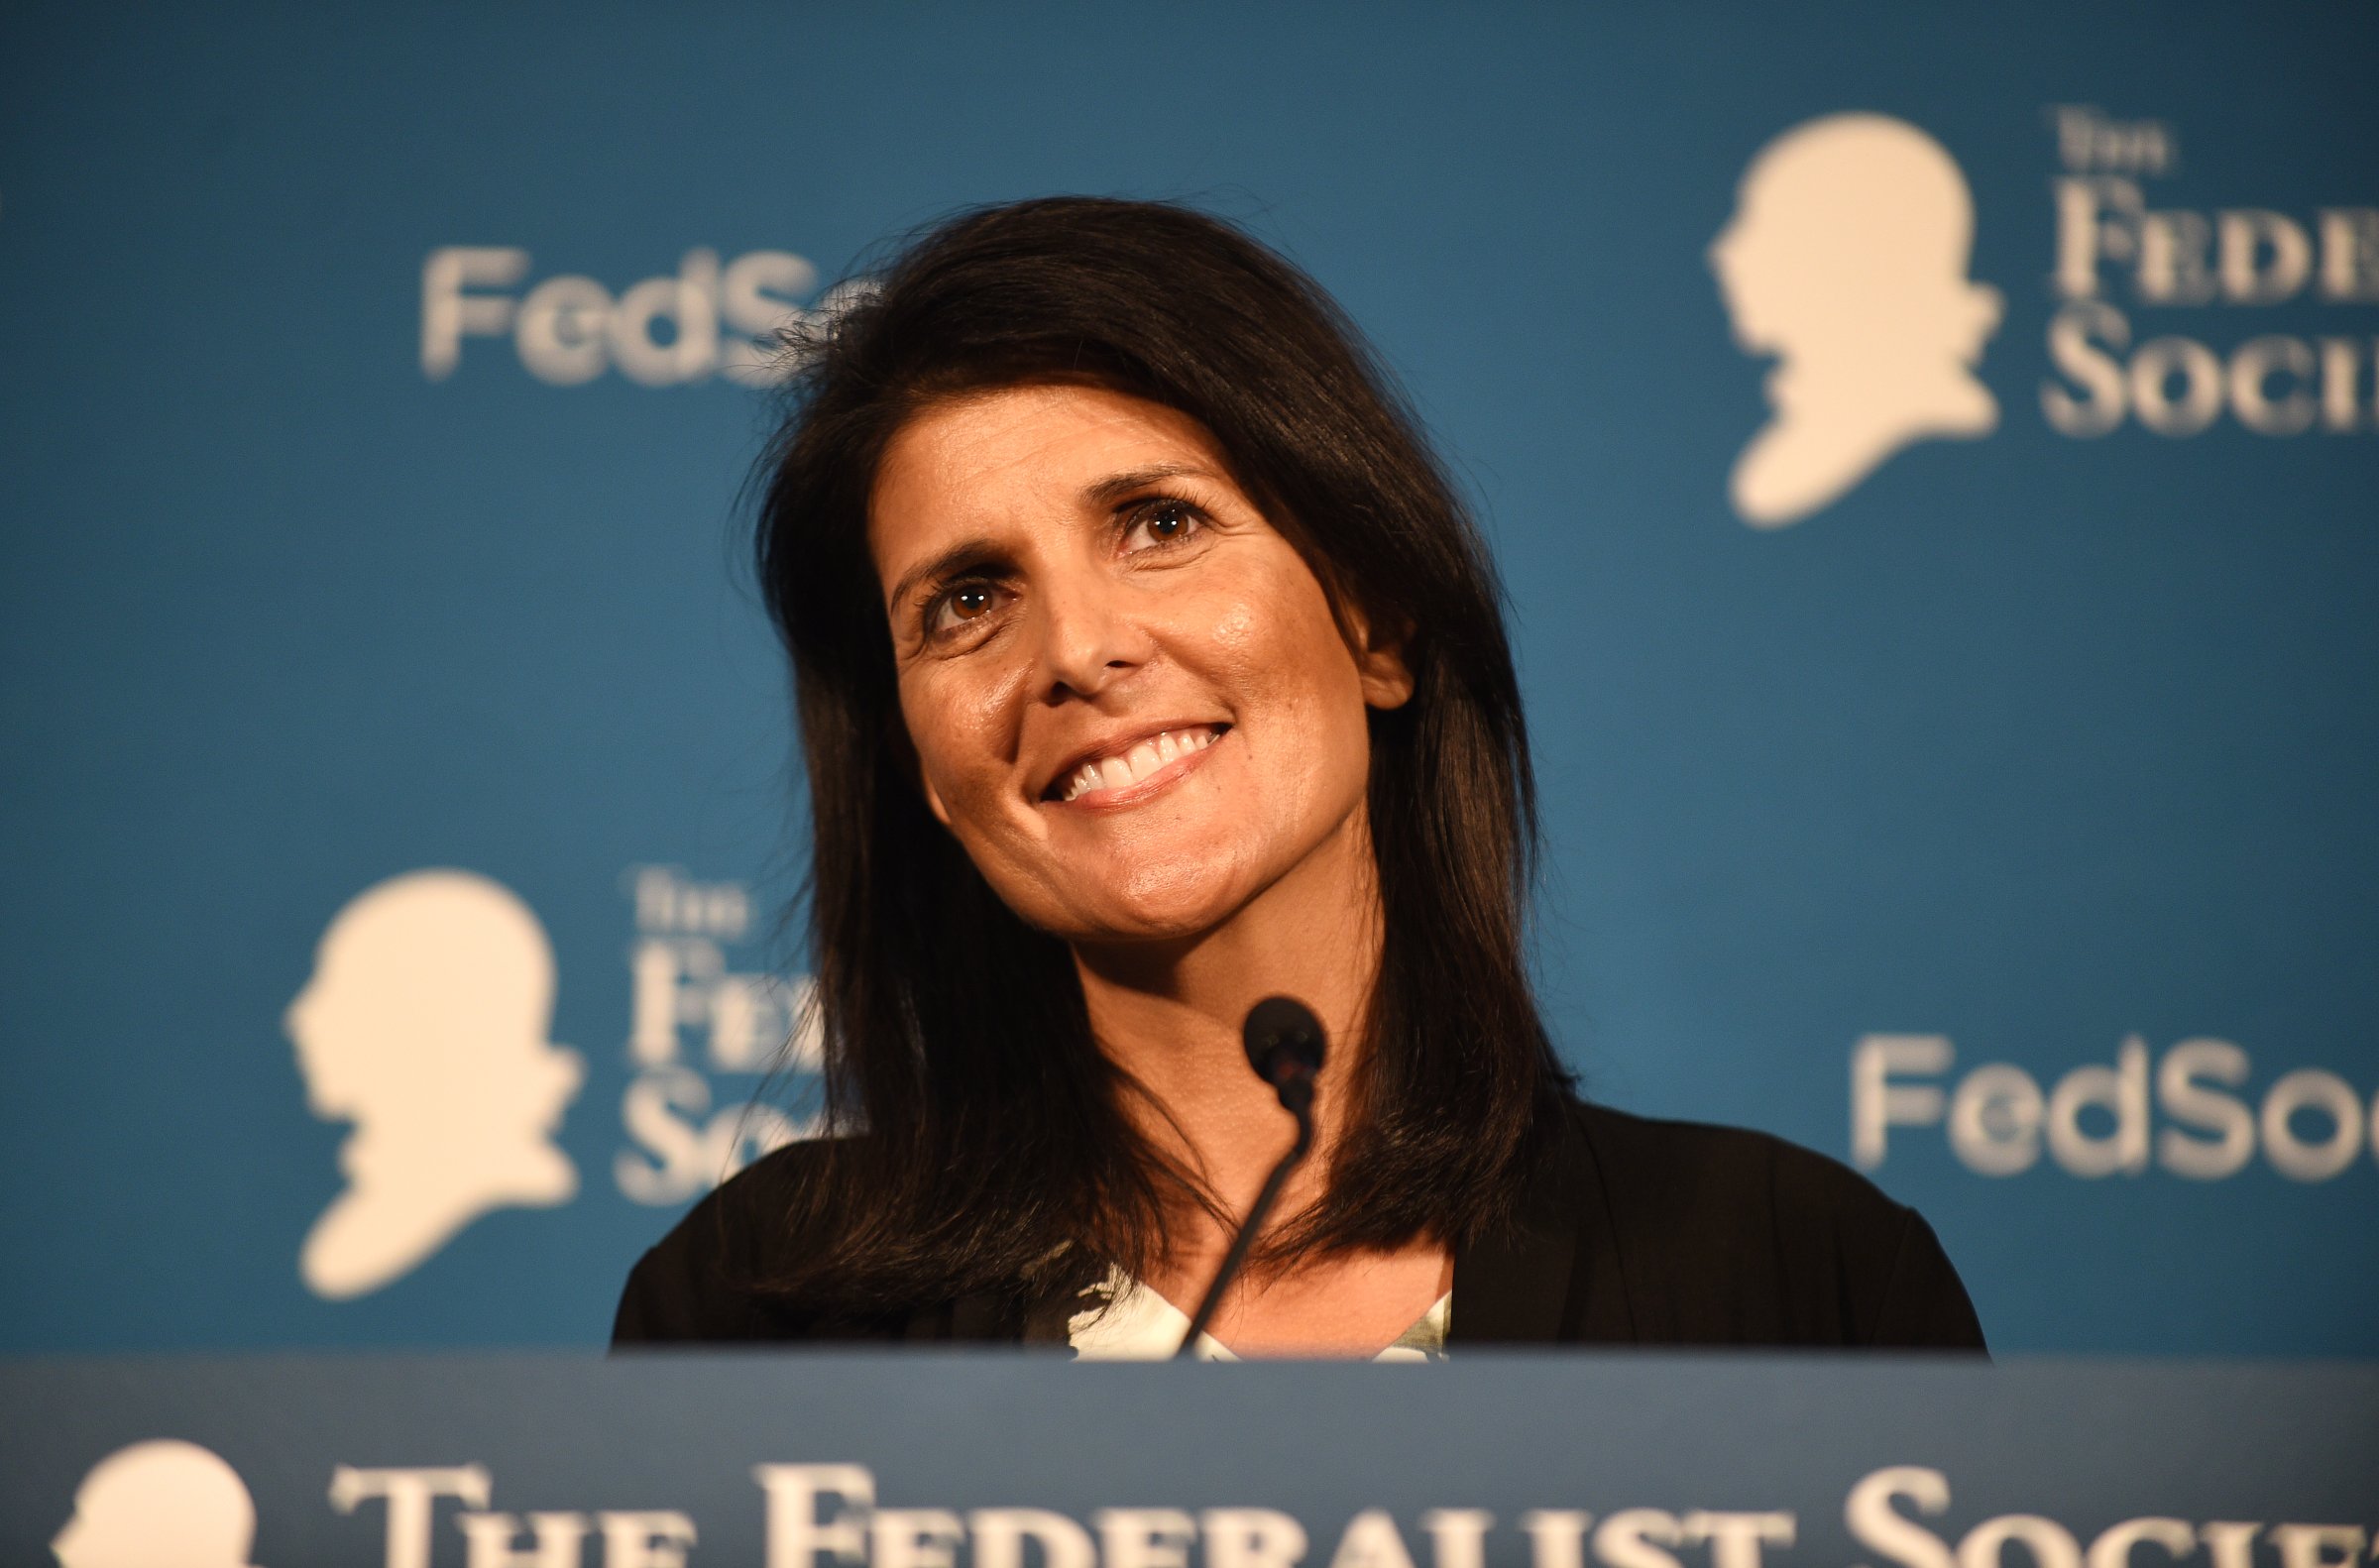 Nikki Haley, Governor, South Carolina, speaks during the 2016 National Lawyers Convention of The Federalist Society at the Mayflower Hotel in Washington, D.C., November 18, 2016. During her speech the governor addressed the need for the country to heal and to work together.